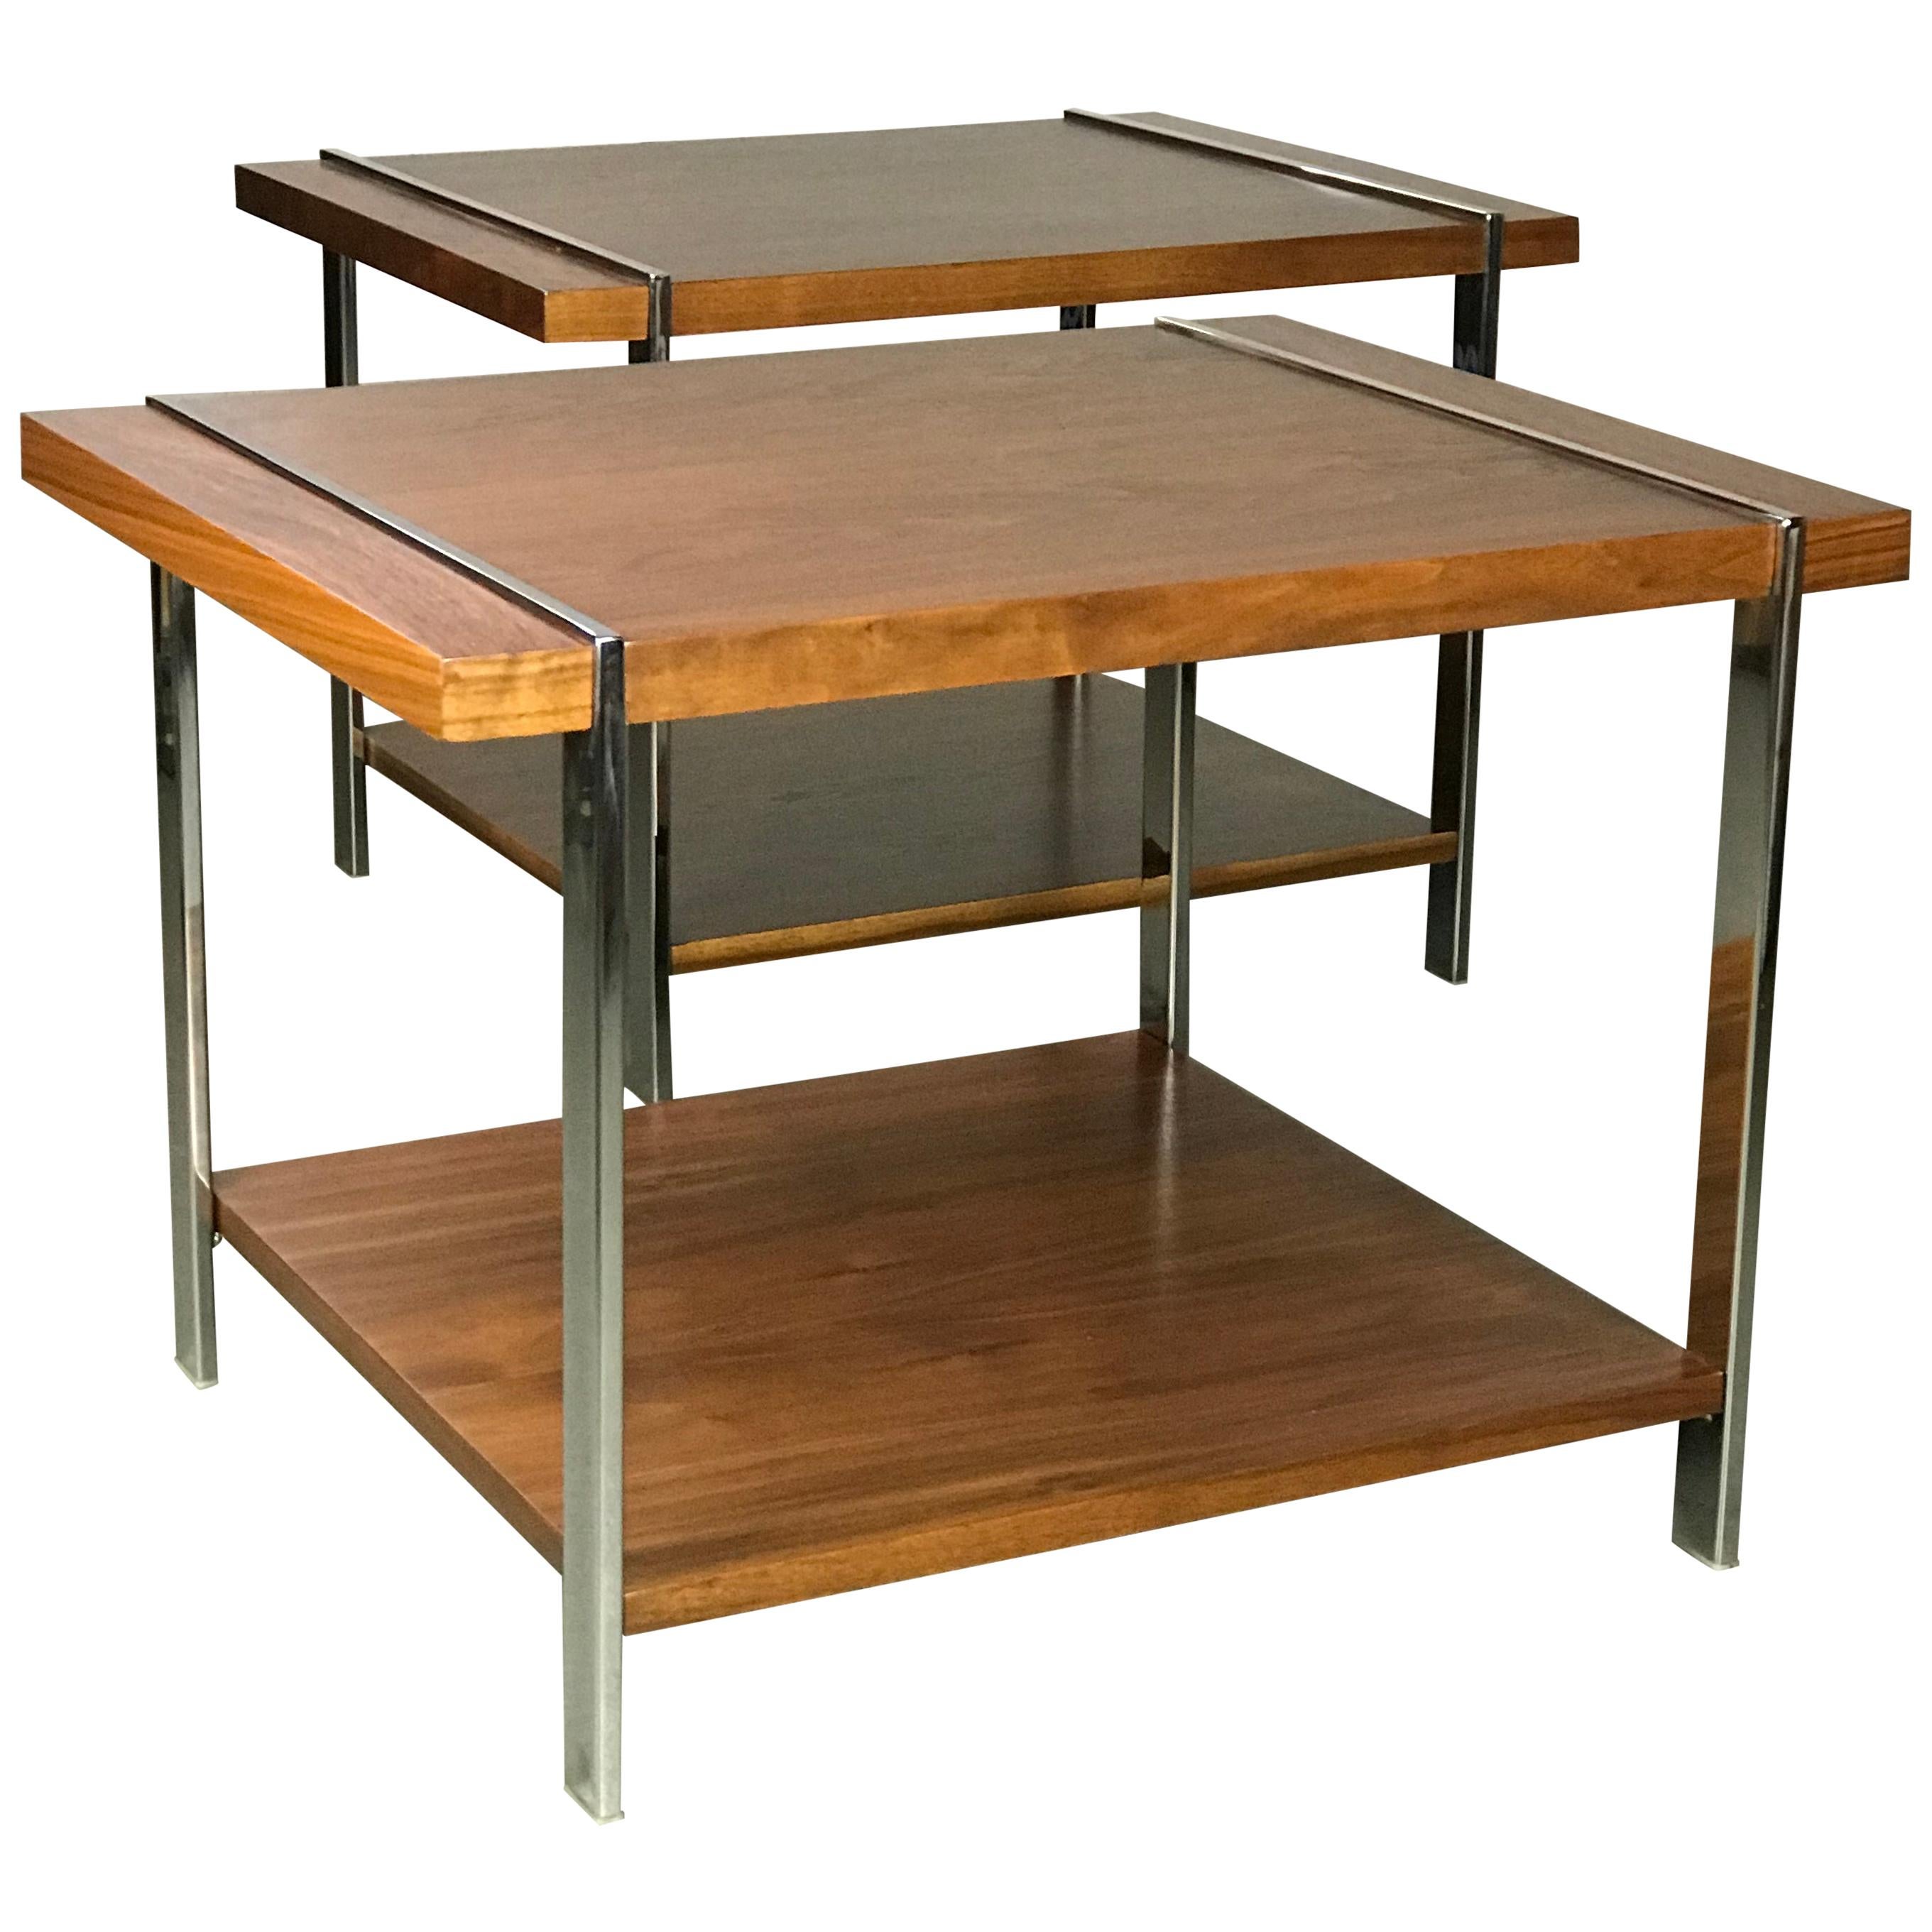 Architectural Mid-Century Modern Walnut Rosewood & Chrome End Tables by Lane 